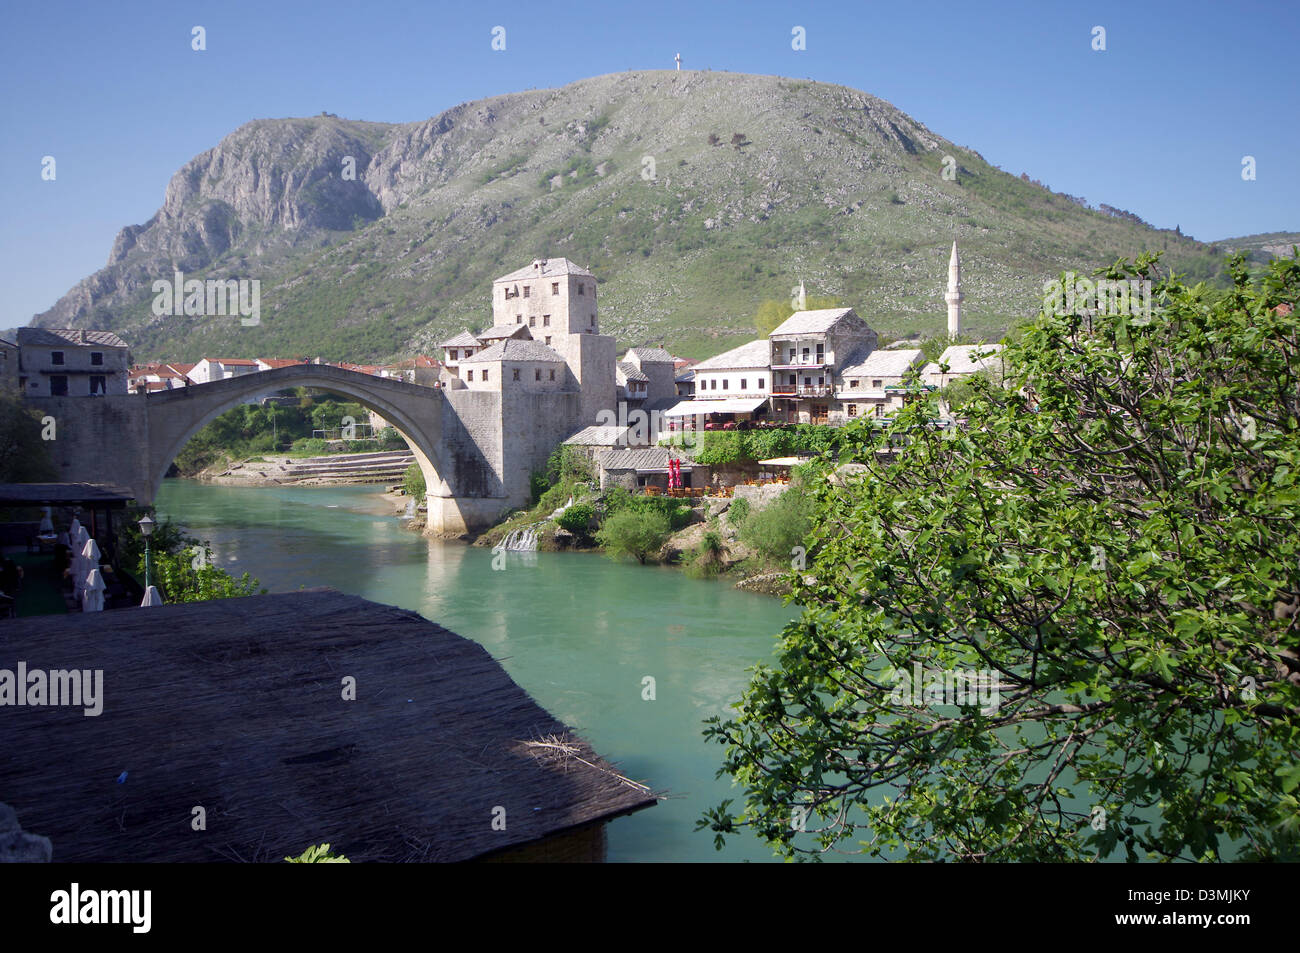 Old Bridge - built 16Th century in Mostar, Bosnia and Herzegovina. Crosses the river Neretva connects Moslems and Christians Stock Photo